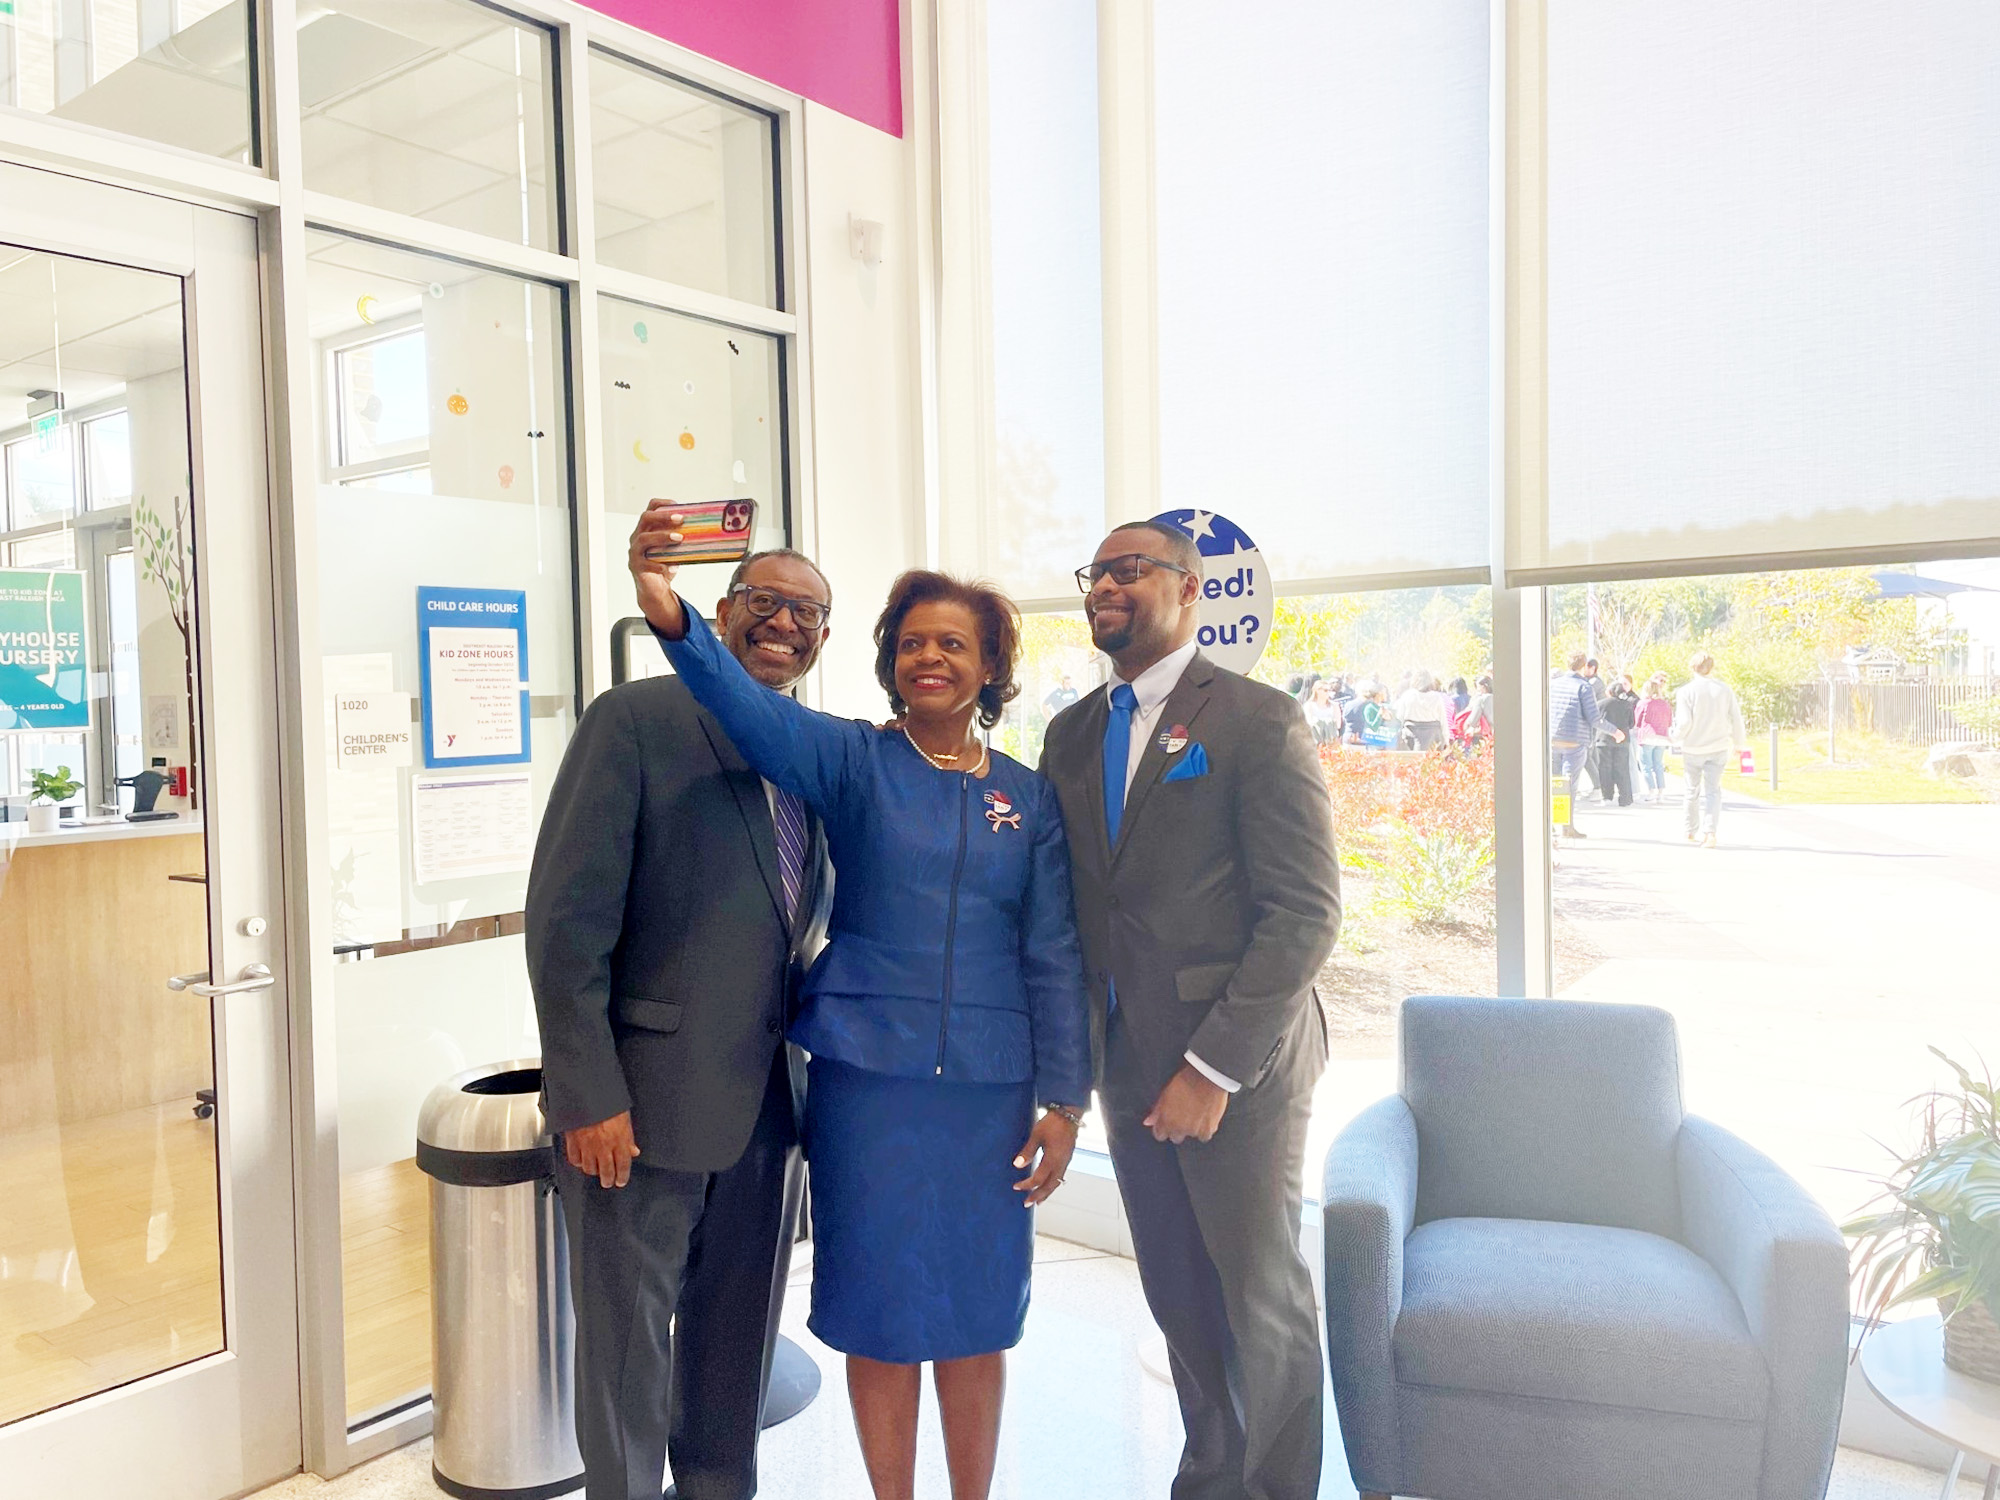 PHOTO: Cheri Beasley takes a selfie with her husband and son after voting early in-person in Raleigh, N.C.